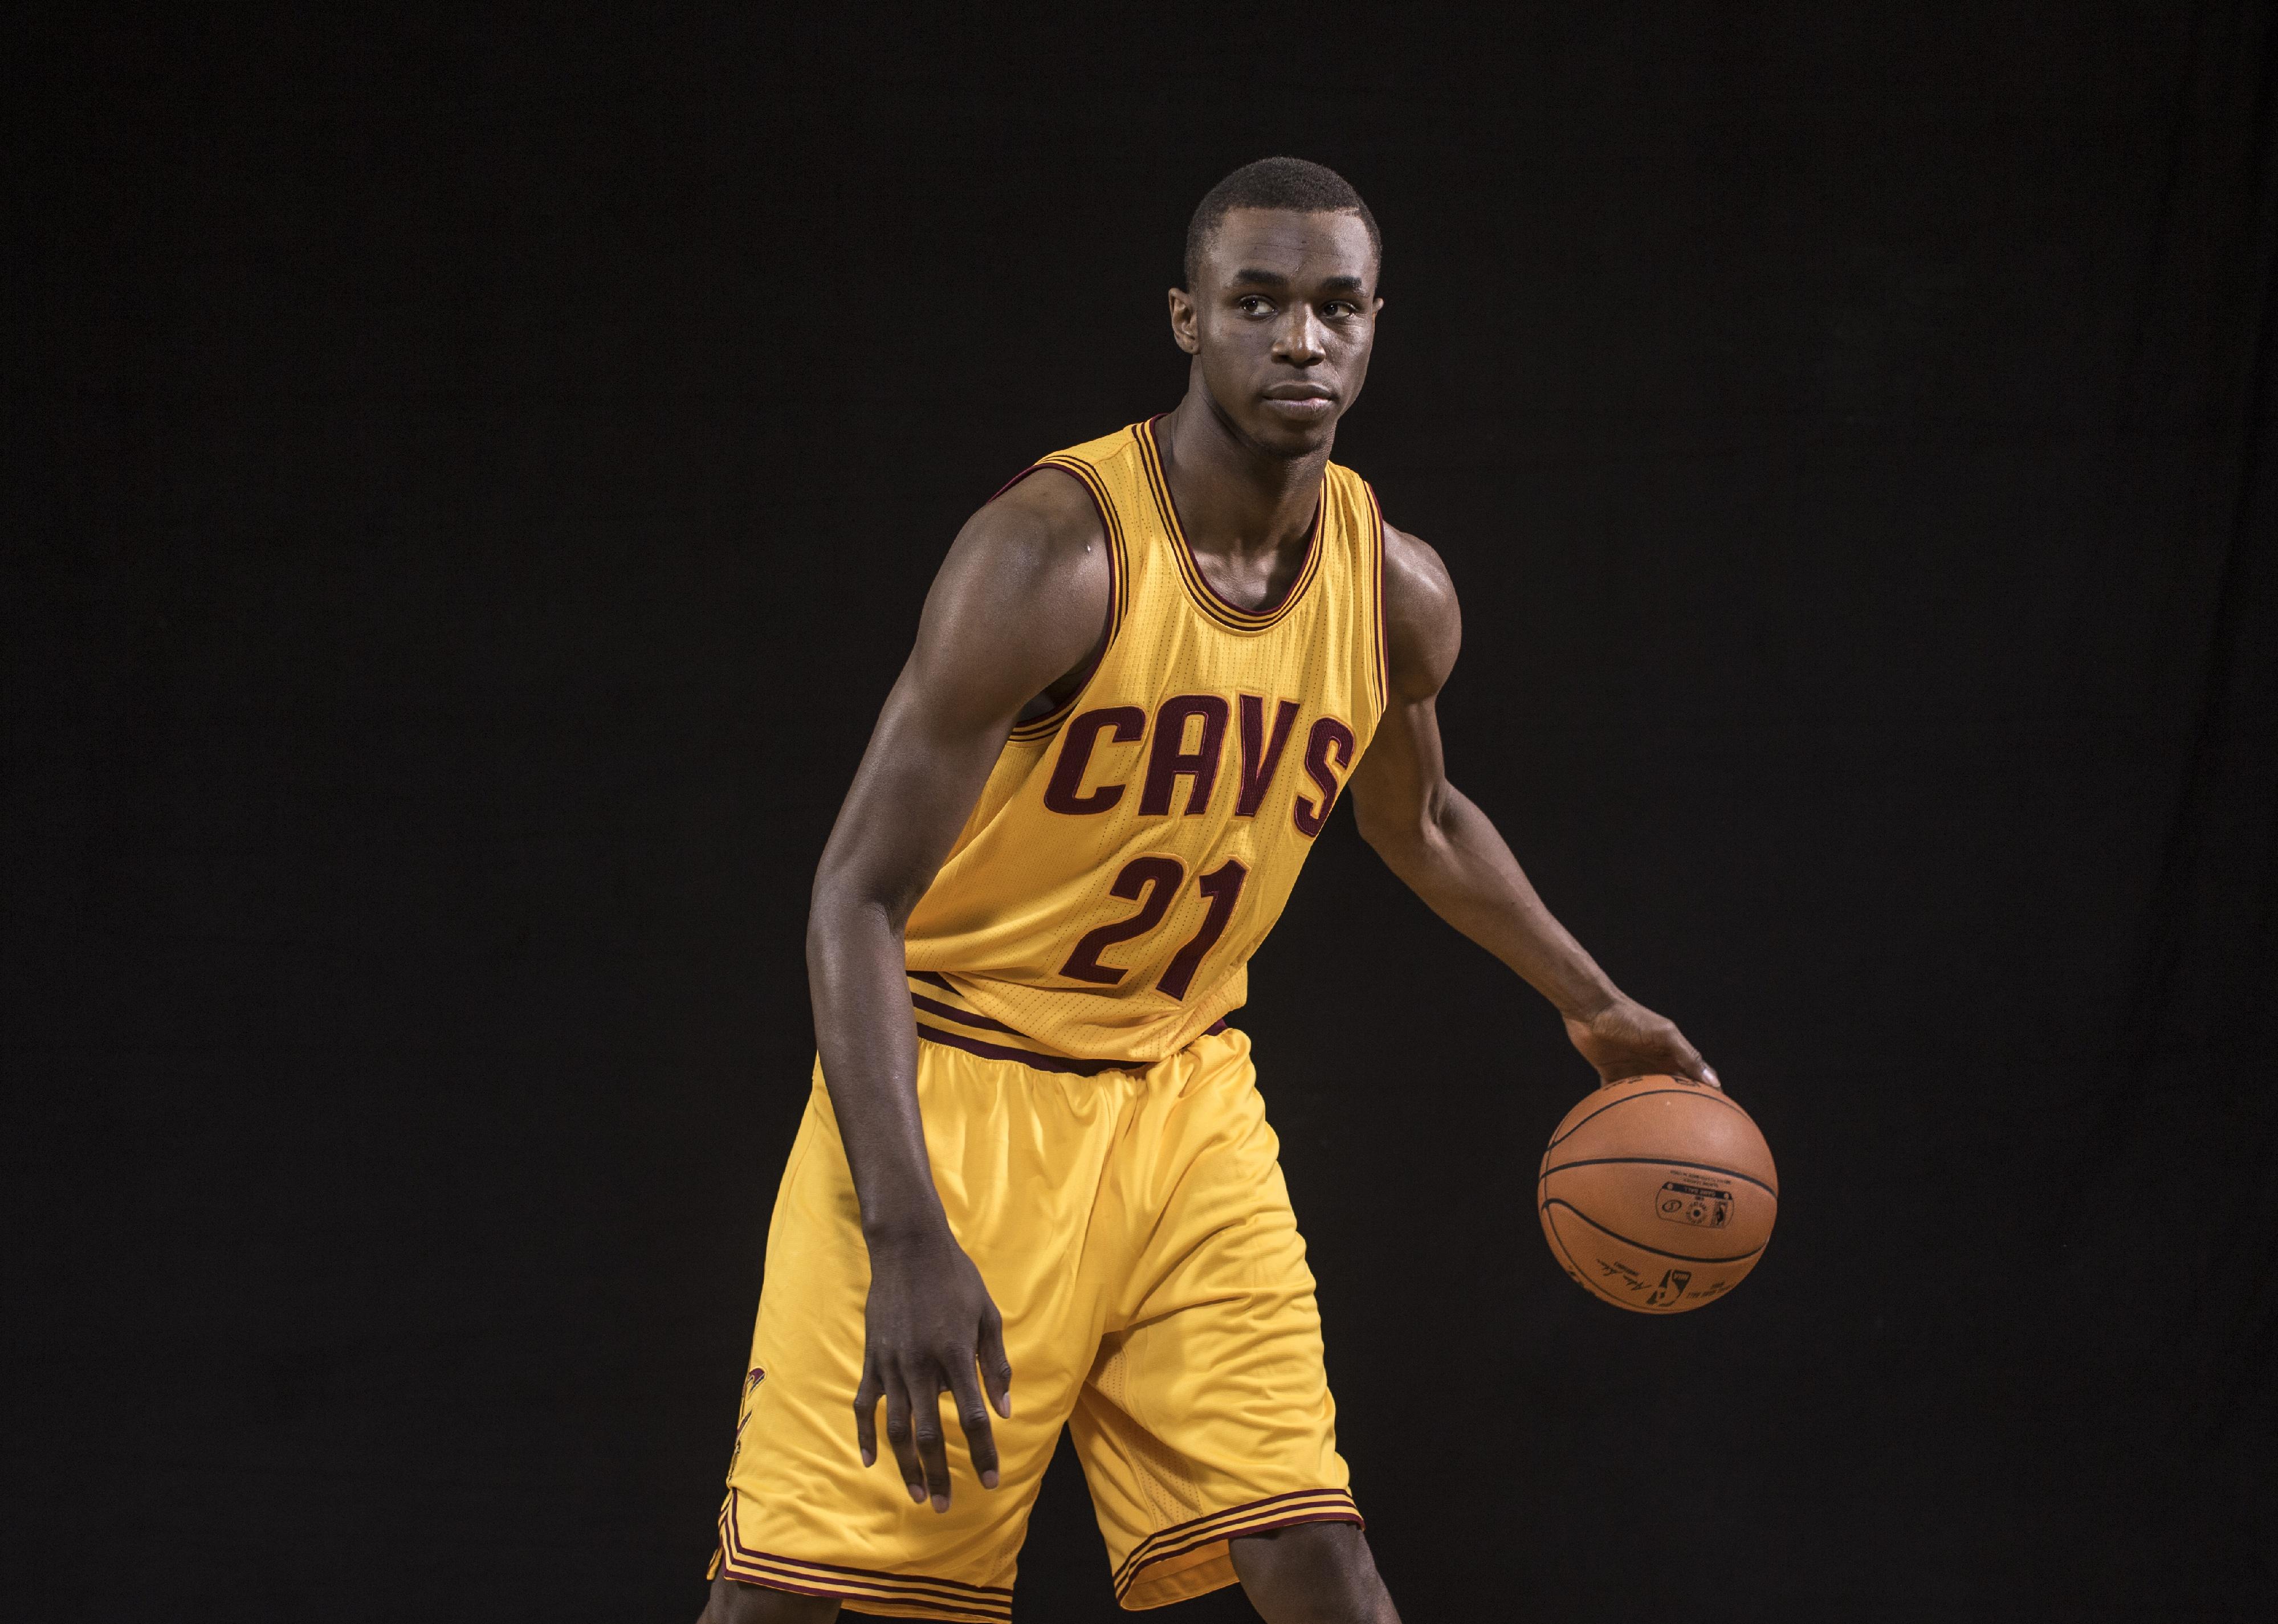 Andrew Wiggins poses for a portrait during the 2014 NBA rookie photo shoot.